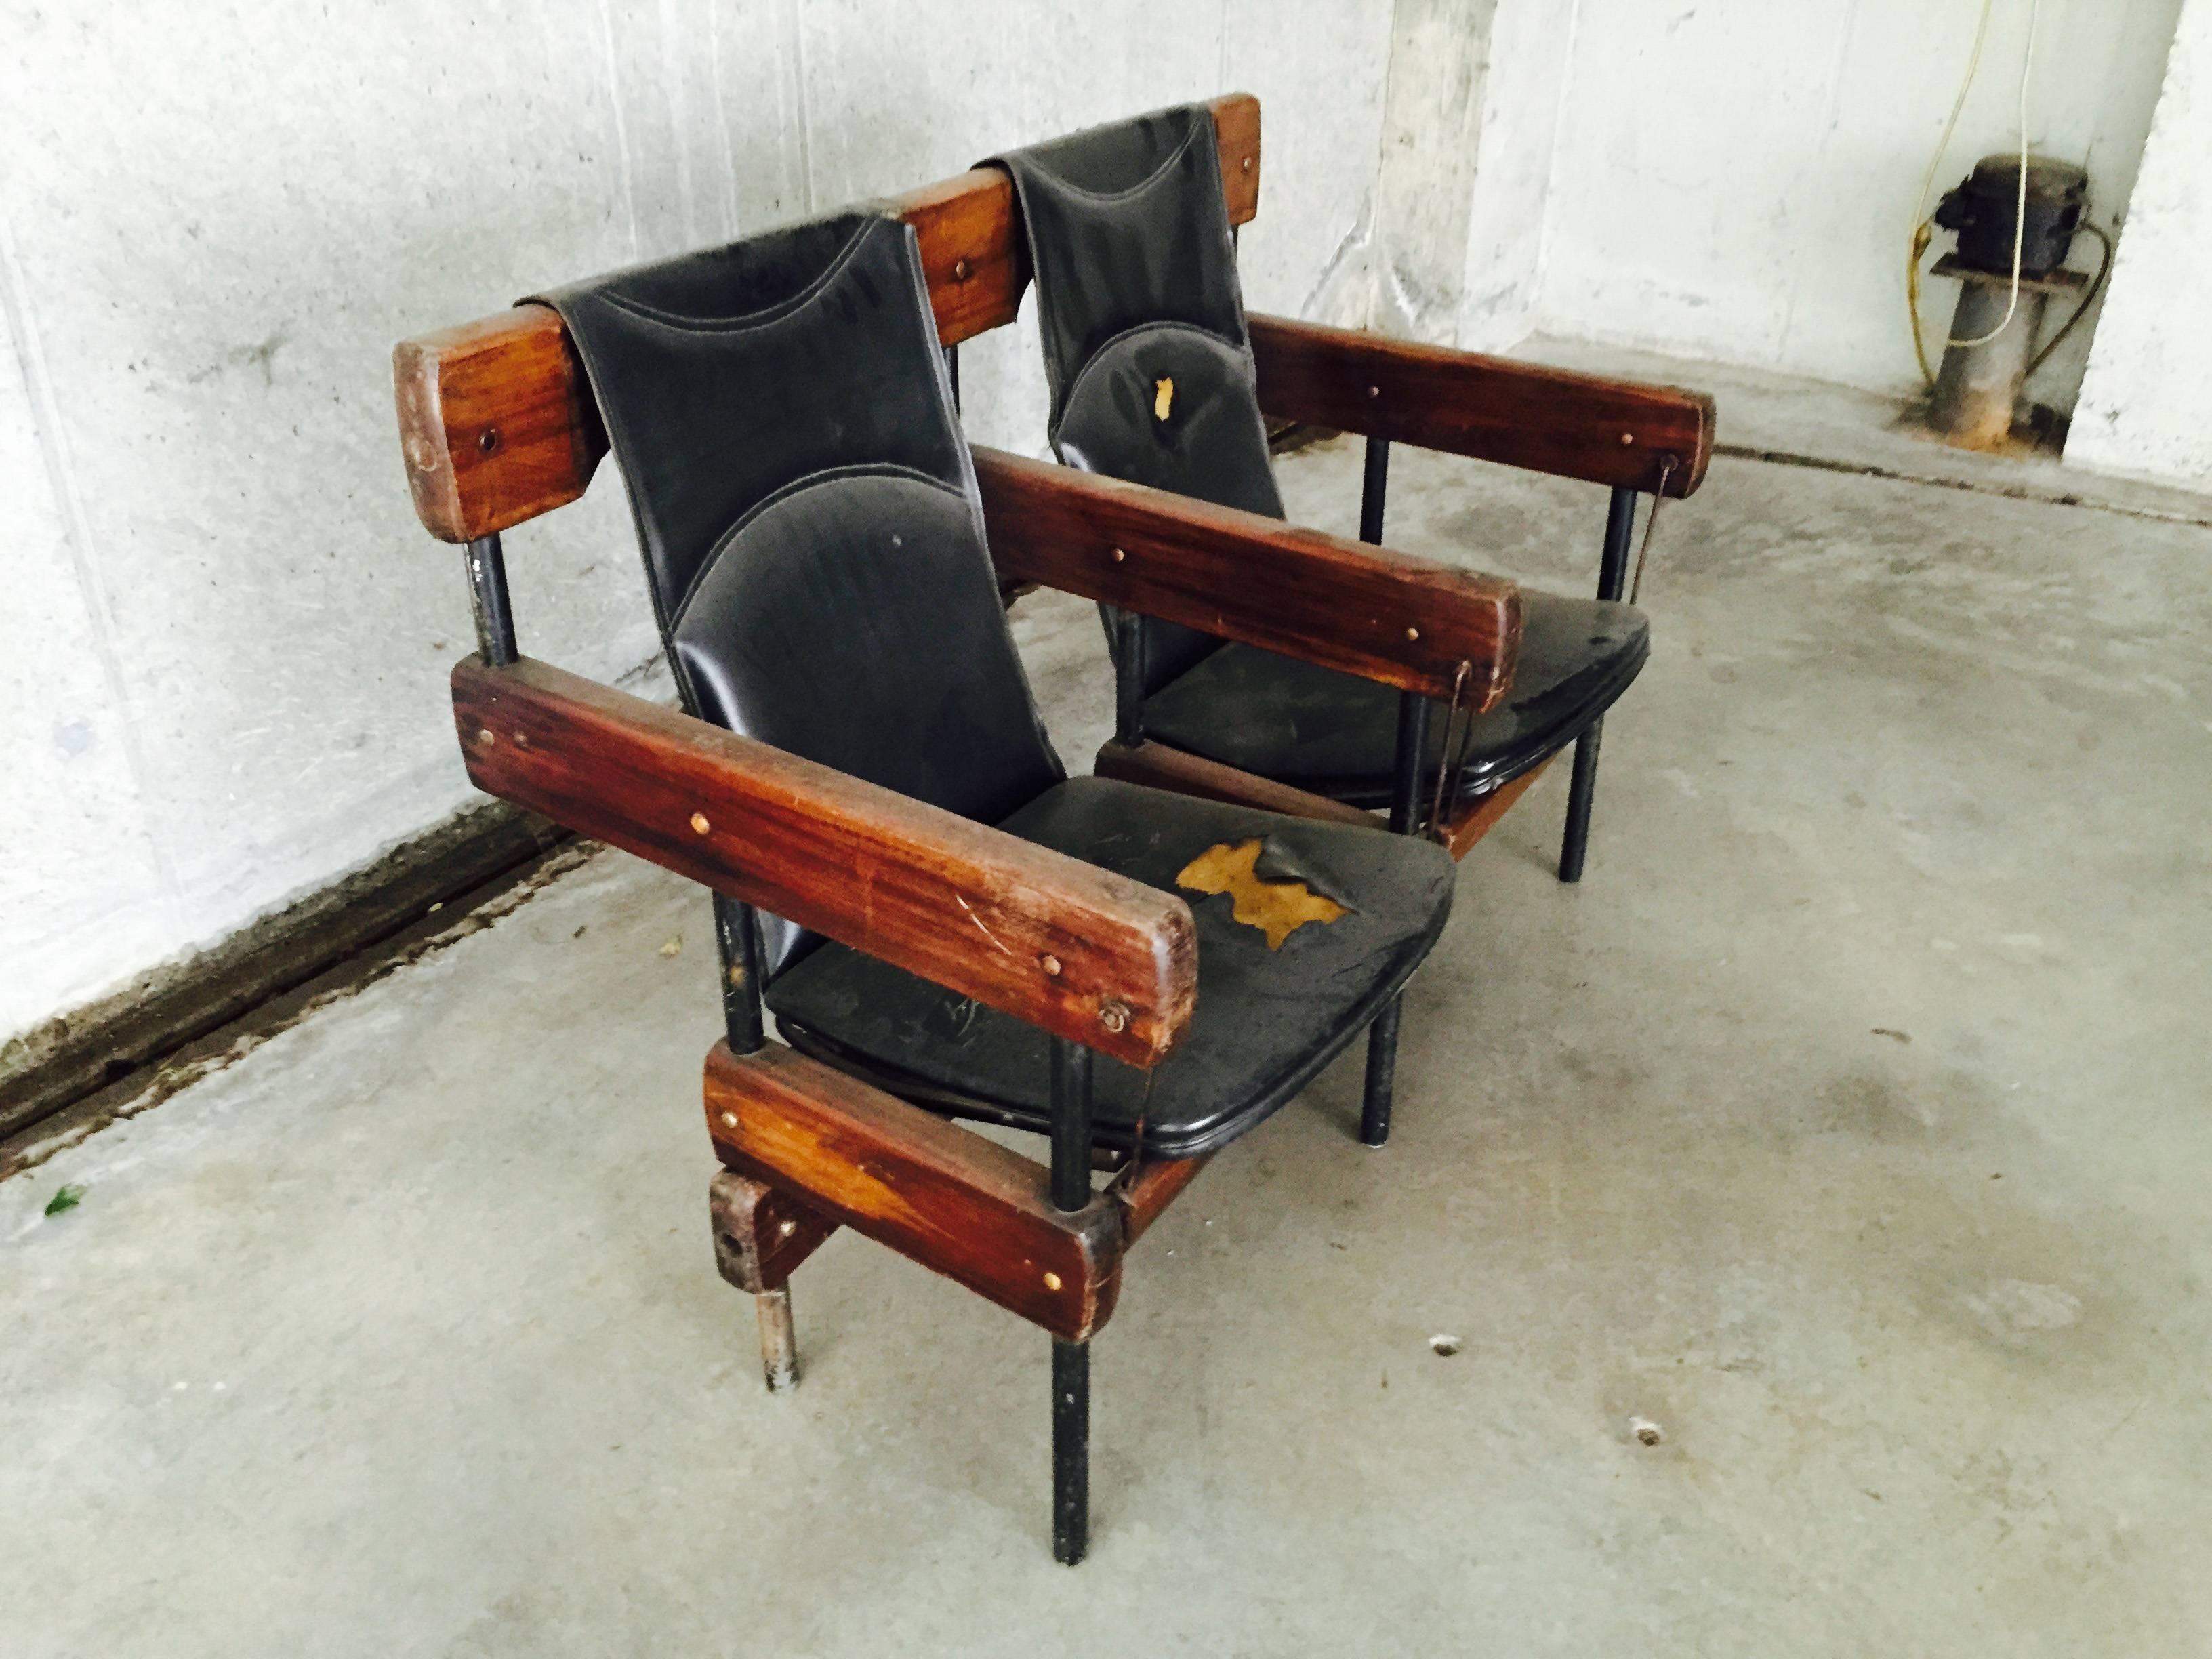 These rare chairs, from the IAB Concert Hall in Rio Janeiro, have a swing mechanism that allowed the audience to gently rock while watching the show.
The seats are to be restored, we can provide the service of restoration.
Illustrated: `Sergio